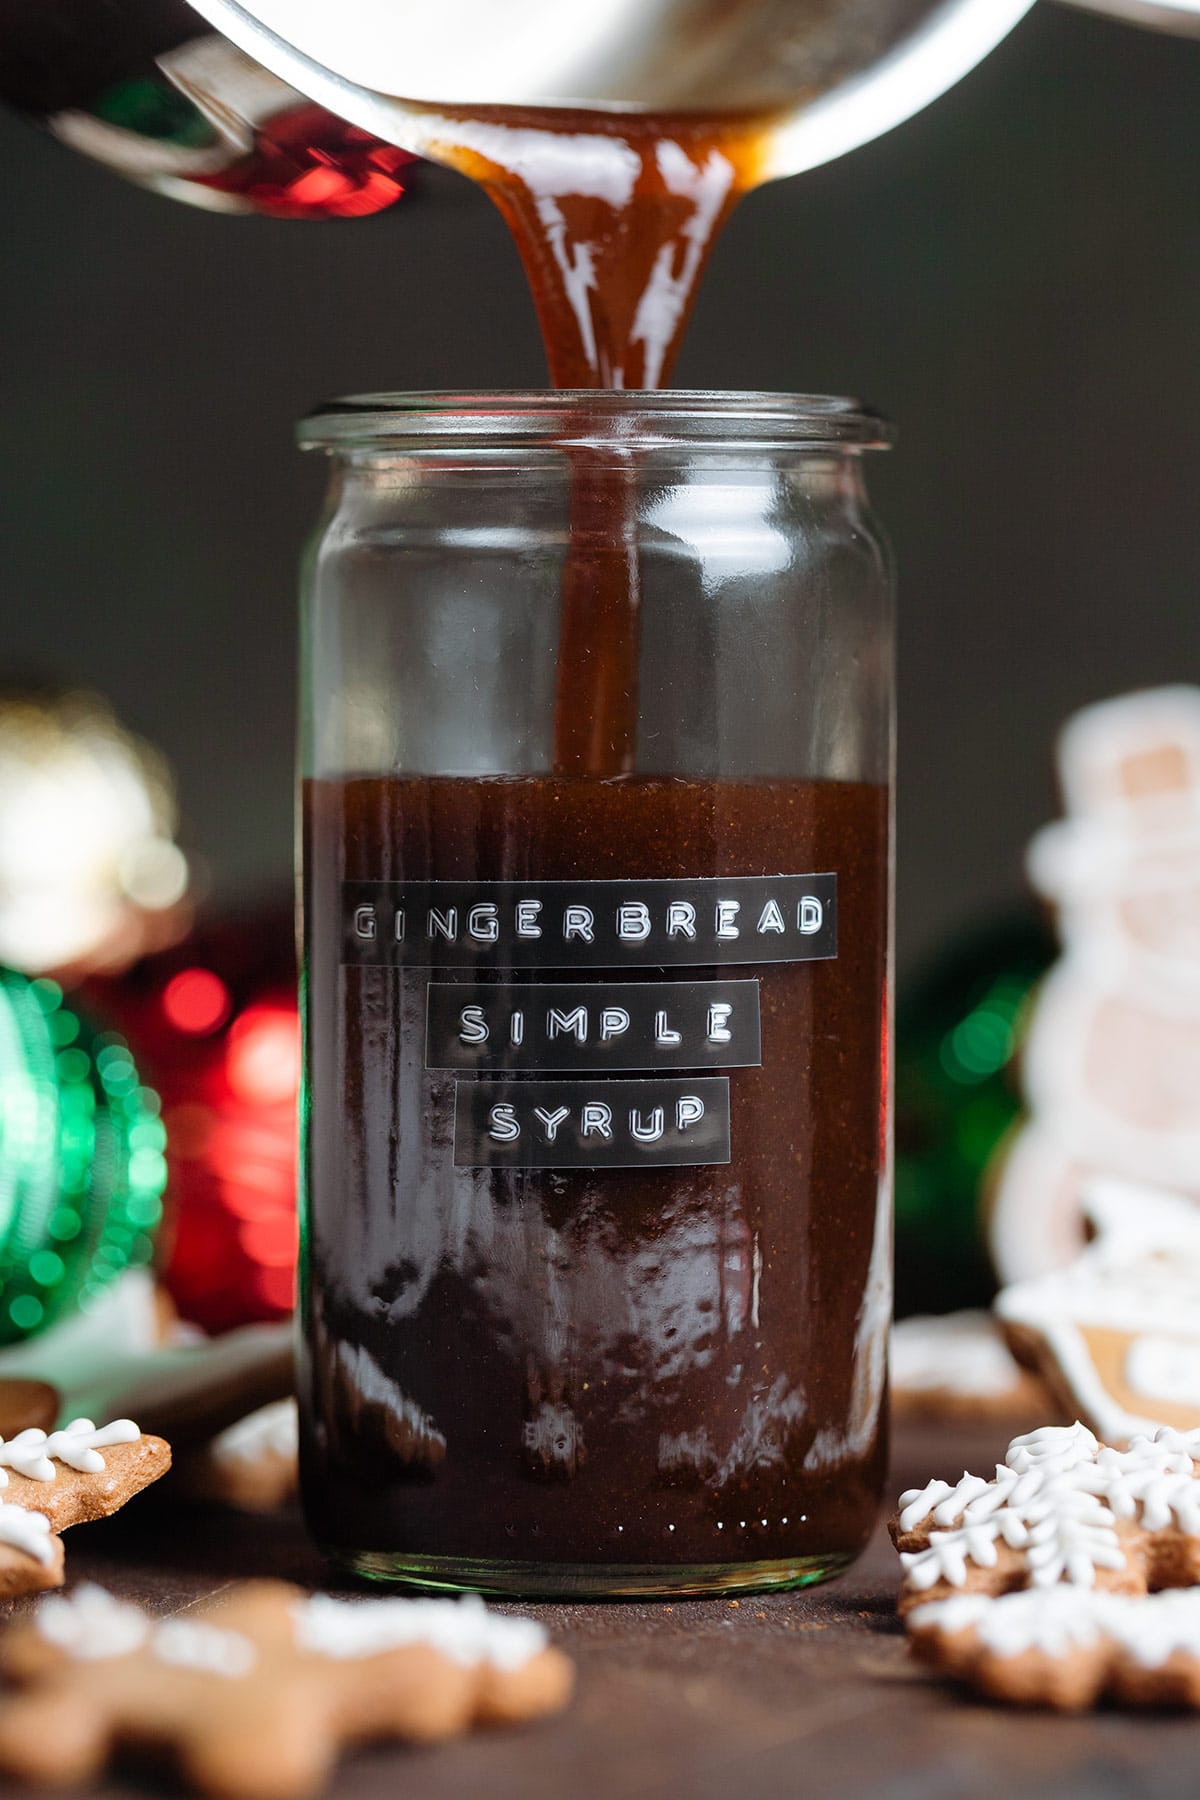 Dark brown syrup being poured into a glass jar with an embossed gingerbread simple syrup label.